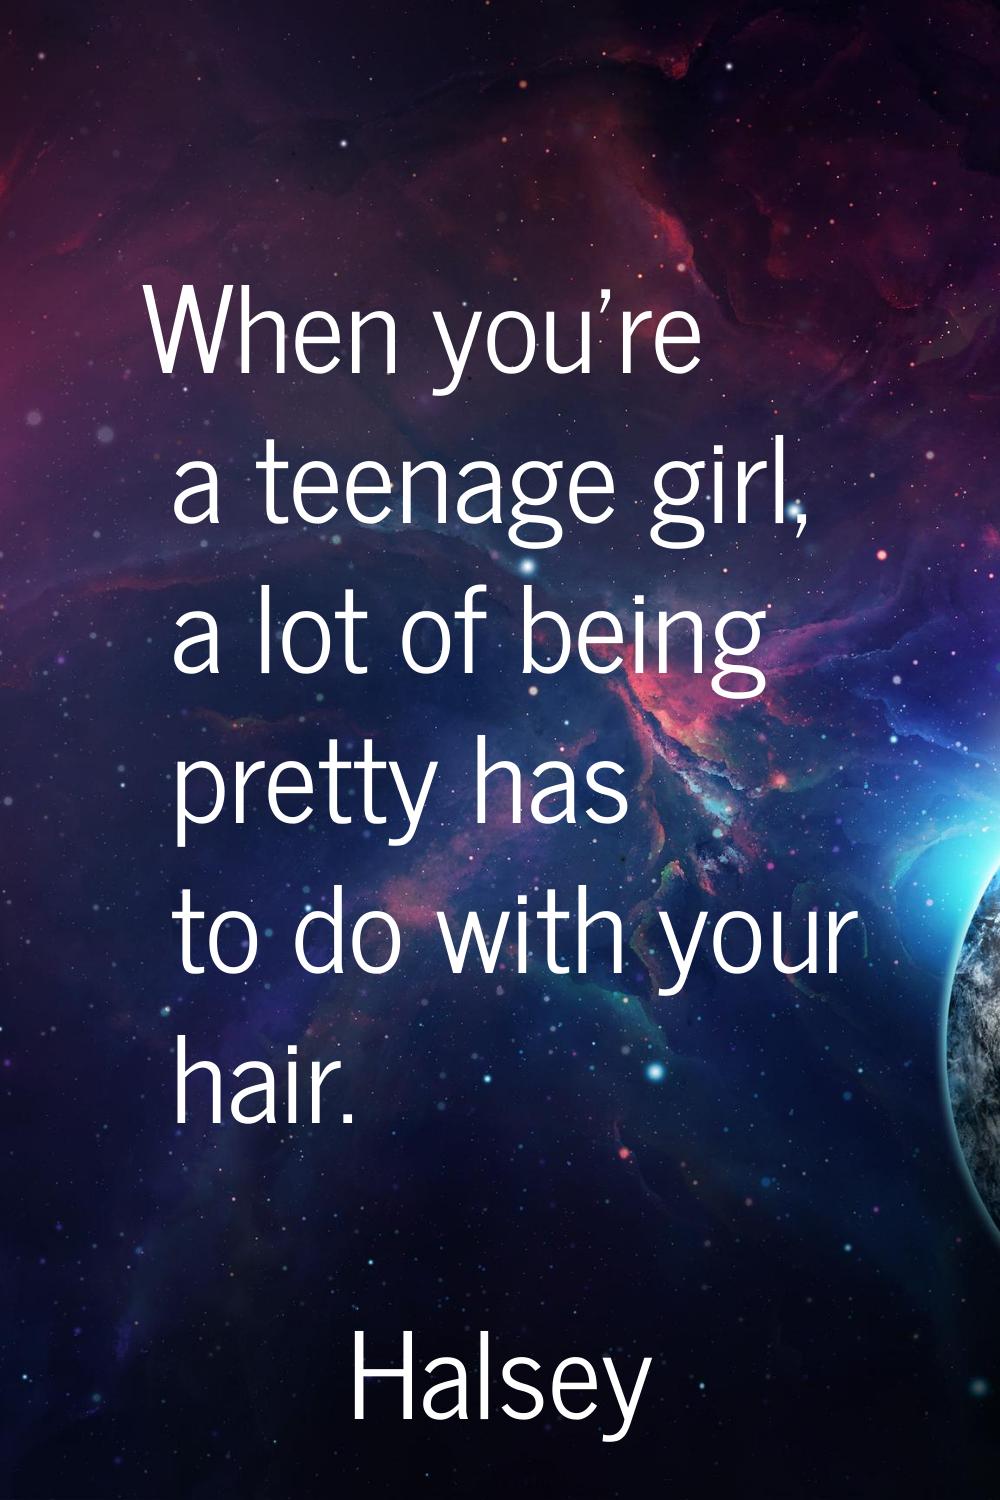 When you're a teenage girl, a lot of being pretty has to do with your hair.